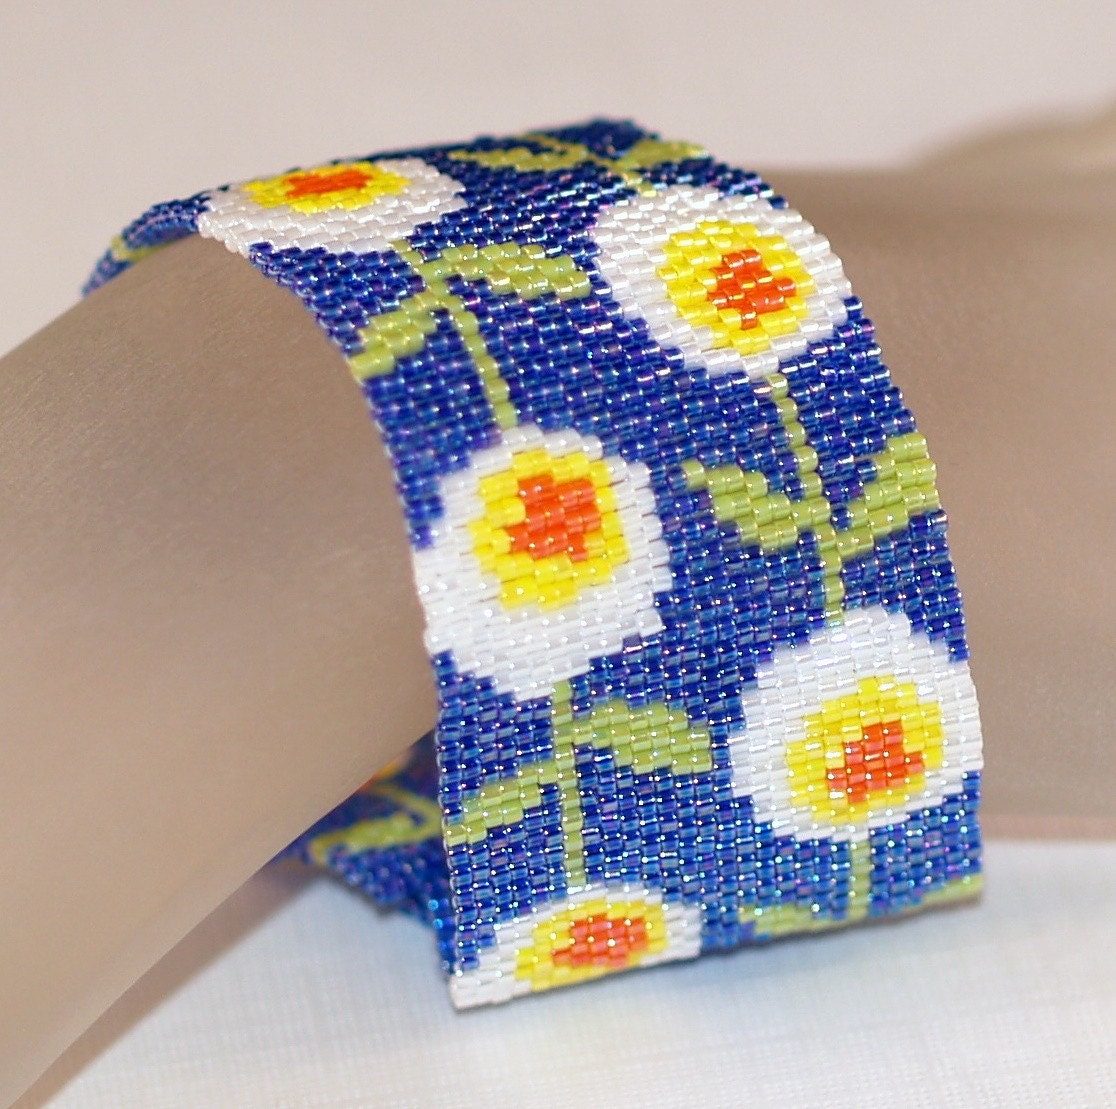 MARCH SALE -- Daisy Chain - Peyote Bracelet / Cuff to Welcome Spring (3183)